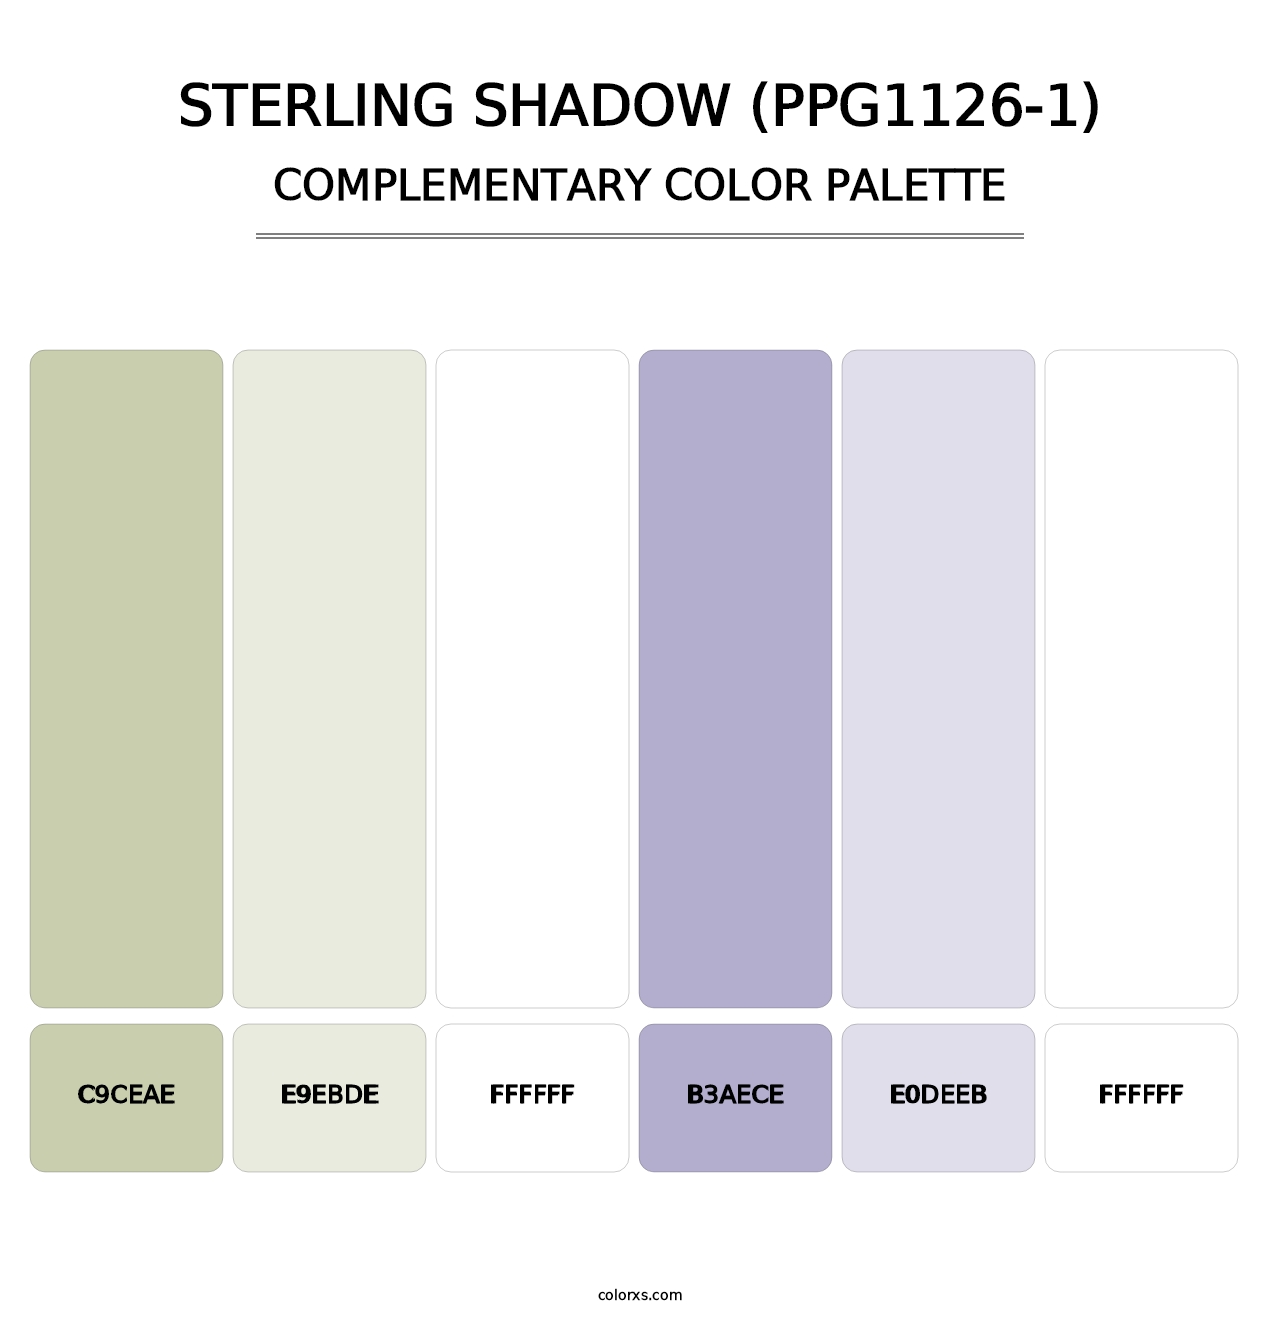 Sterling Shadow (PPG1126-1) - Complementary Color Palette